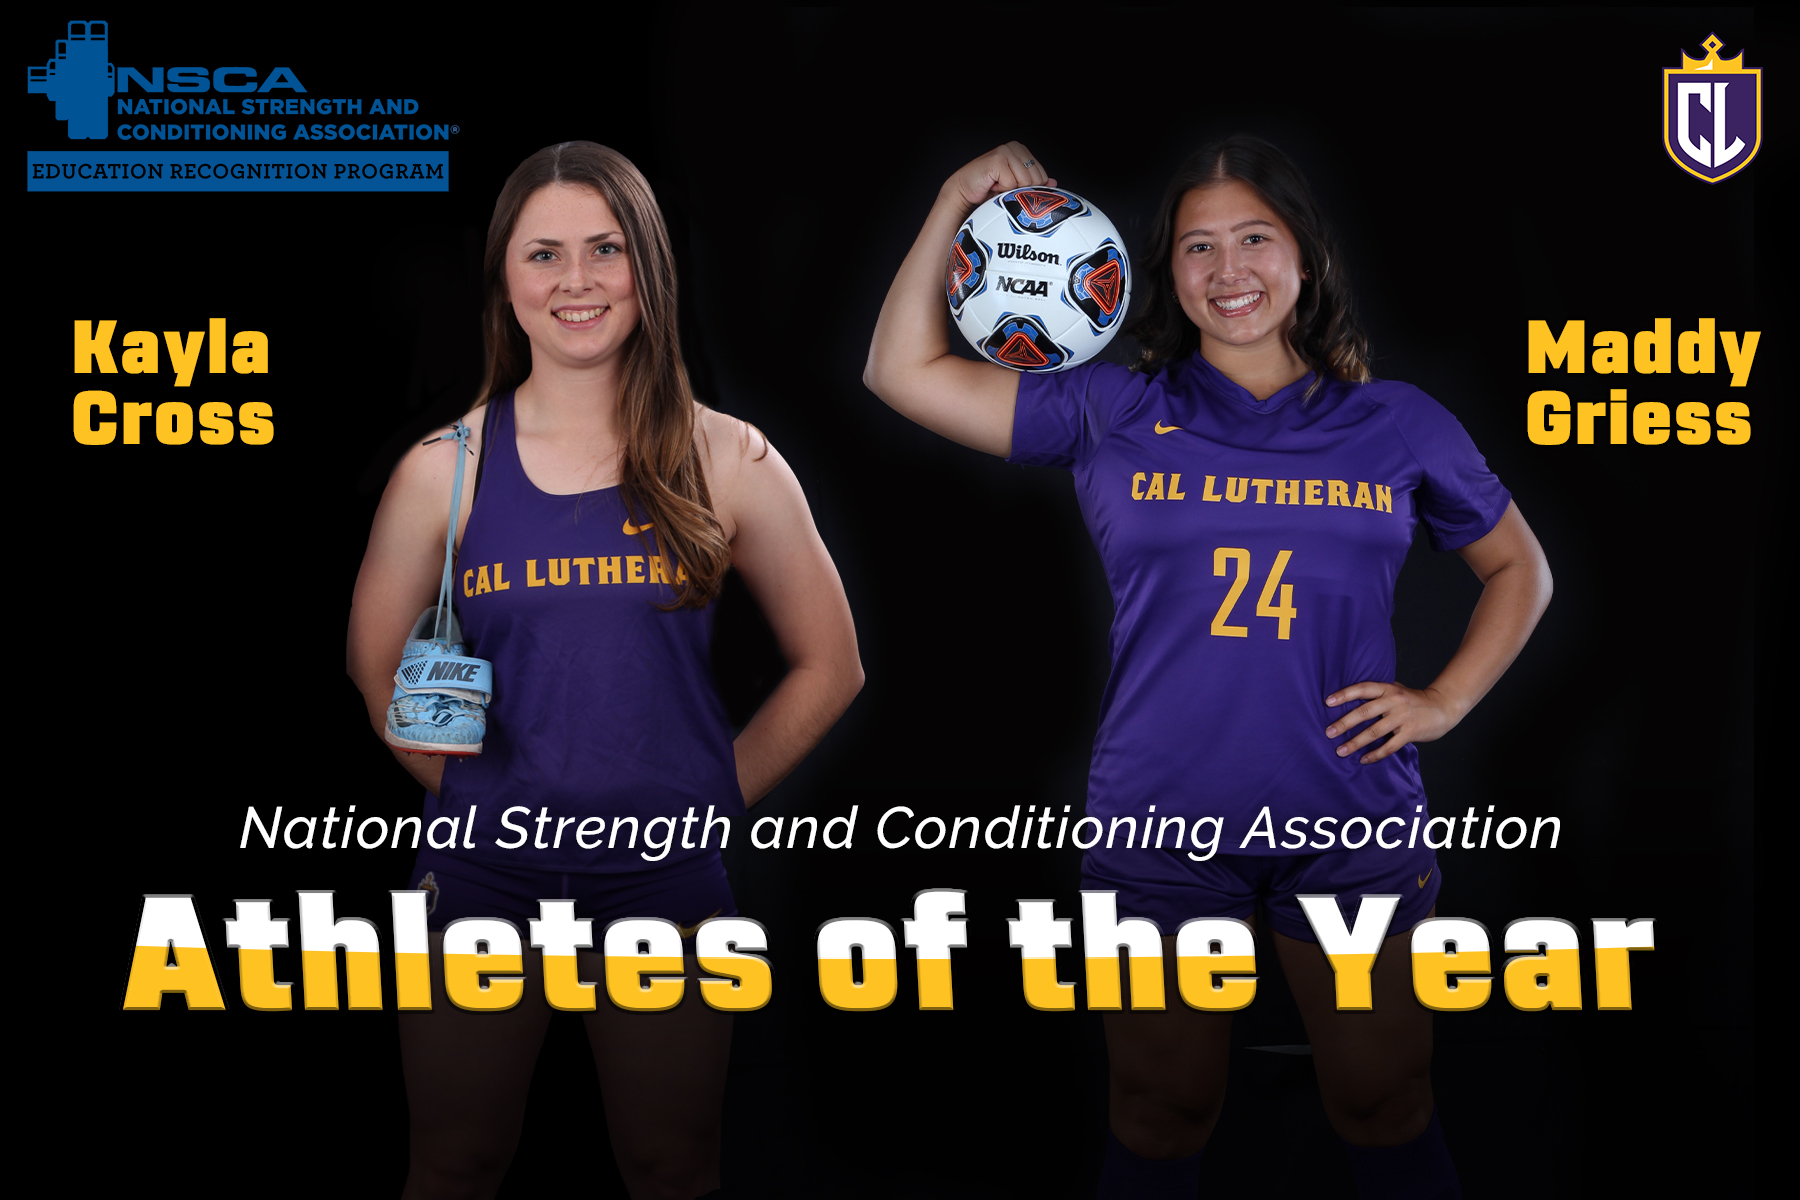 Cross, Griess Earn National Strength and Conditioning Association’s All-American Strength and Conditioning Athlete of the Year